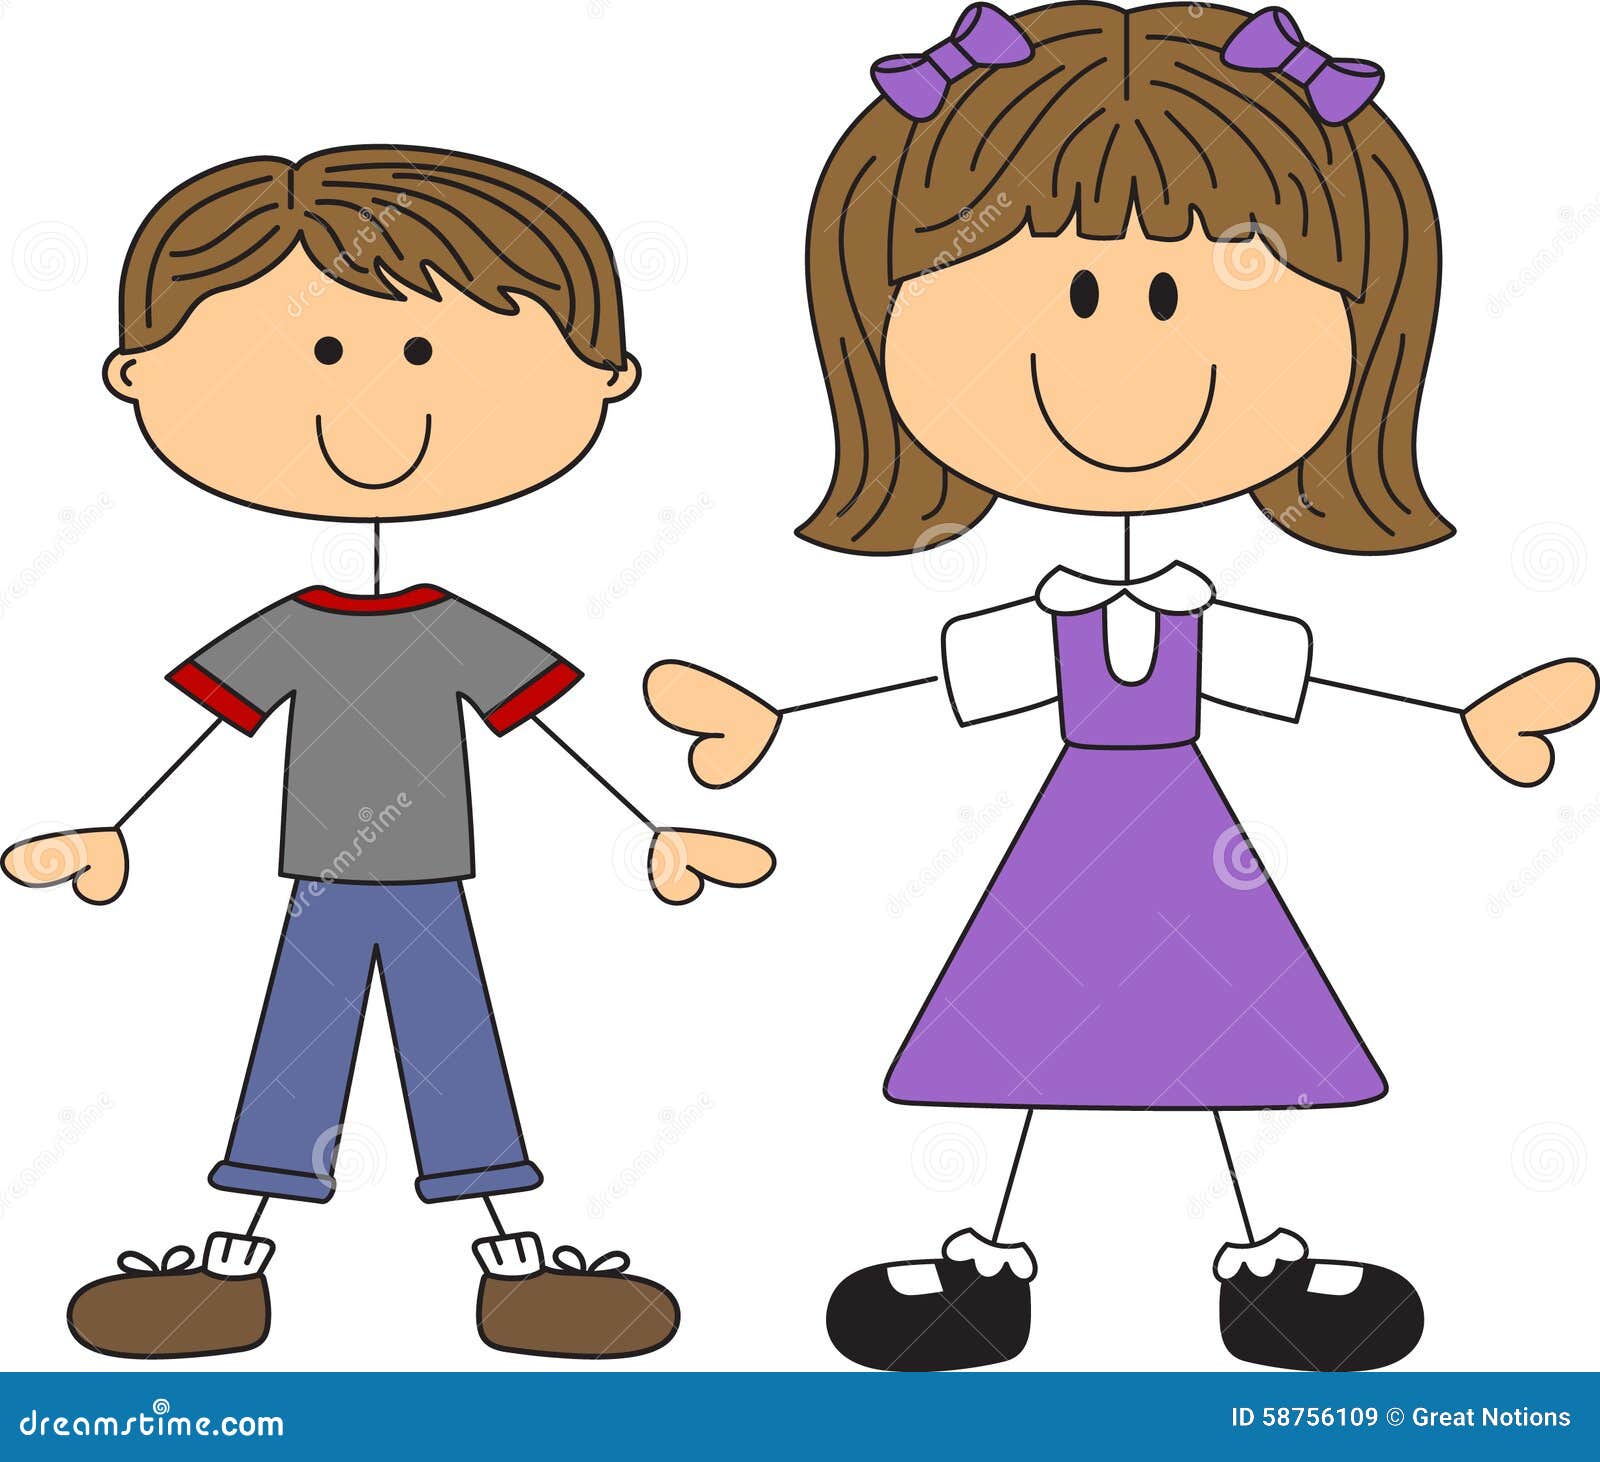 Royalty Free Stock Images: BIG SISTER LITTLE BROTHER. Image: 58756109